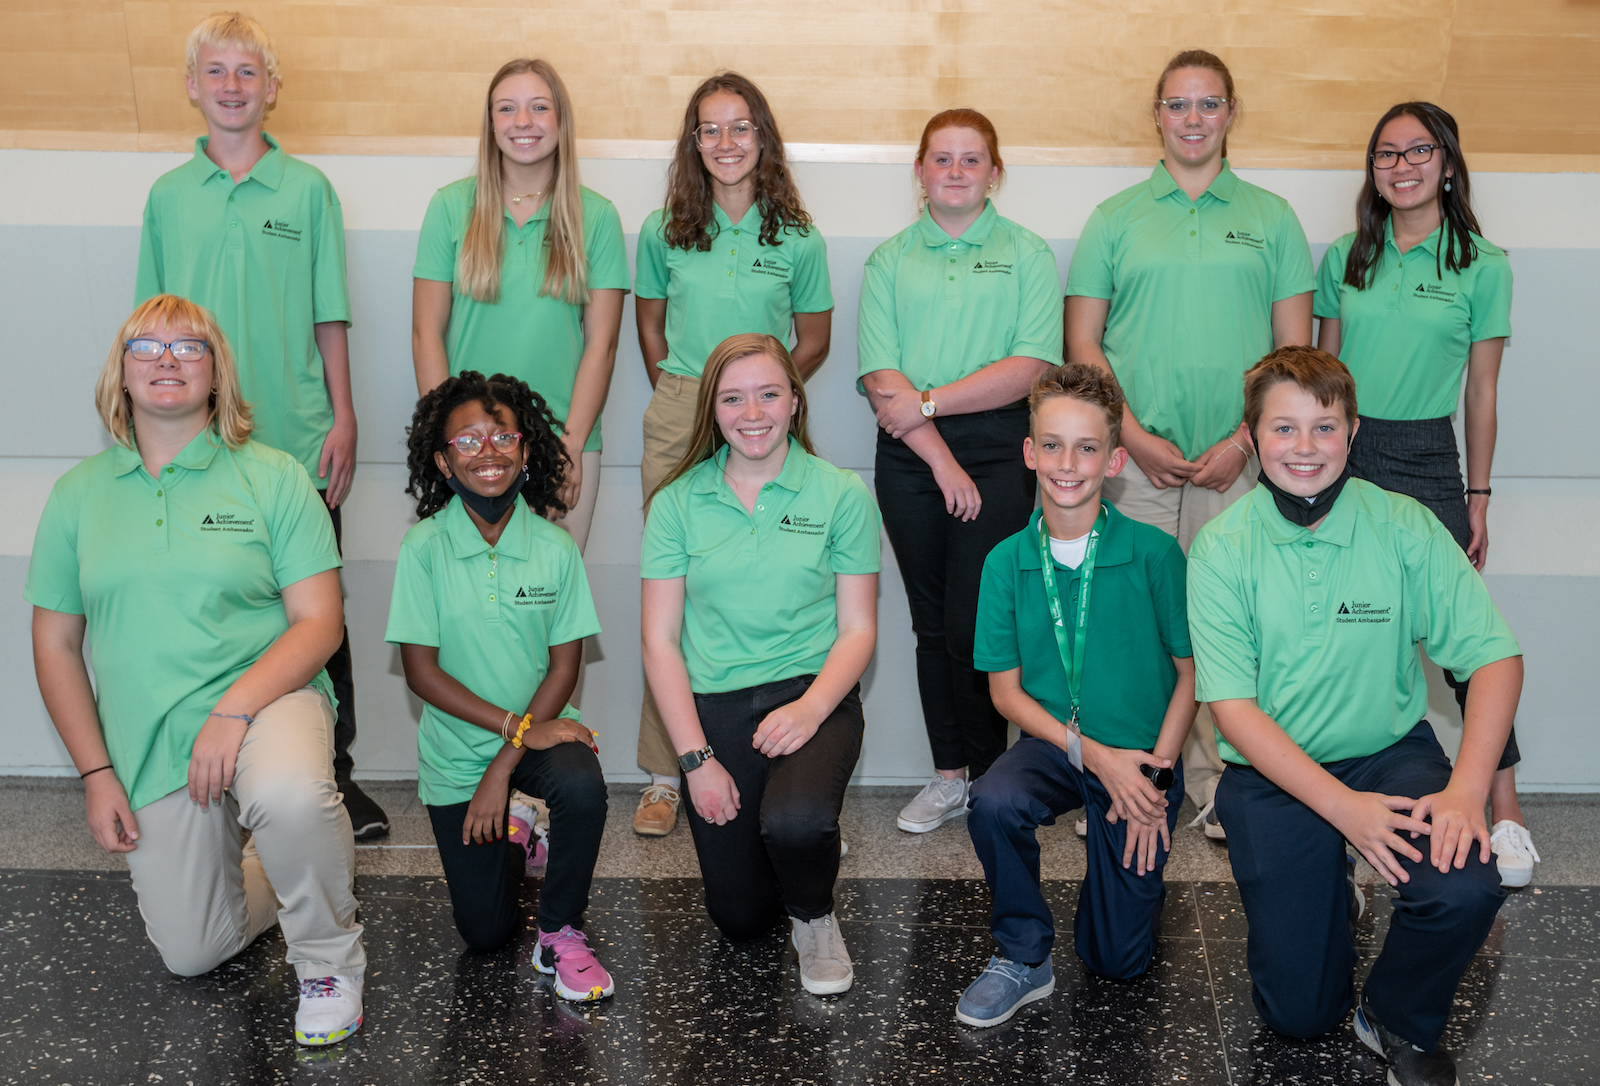 Margaret Wheeler, back row and third from the left, is a member of the Student Board for Junior Achievement of Northeast Indiana (JANI). On the back row to the far right is her fellow board member, Madeline Phuong.